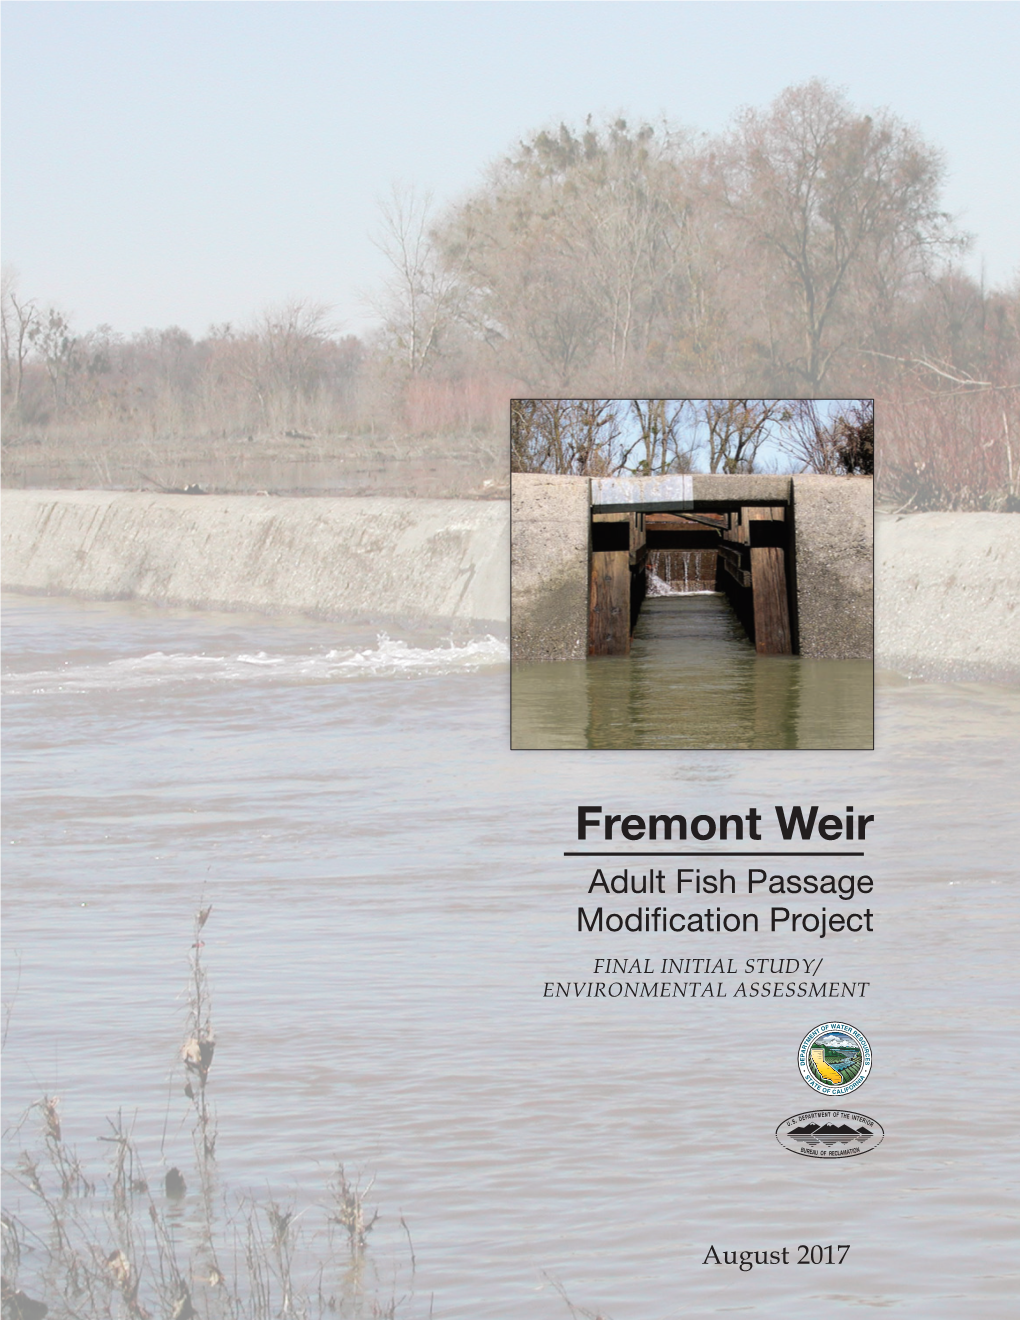 Fremont Weir Adult Fish Passage Modification Project